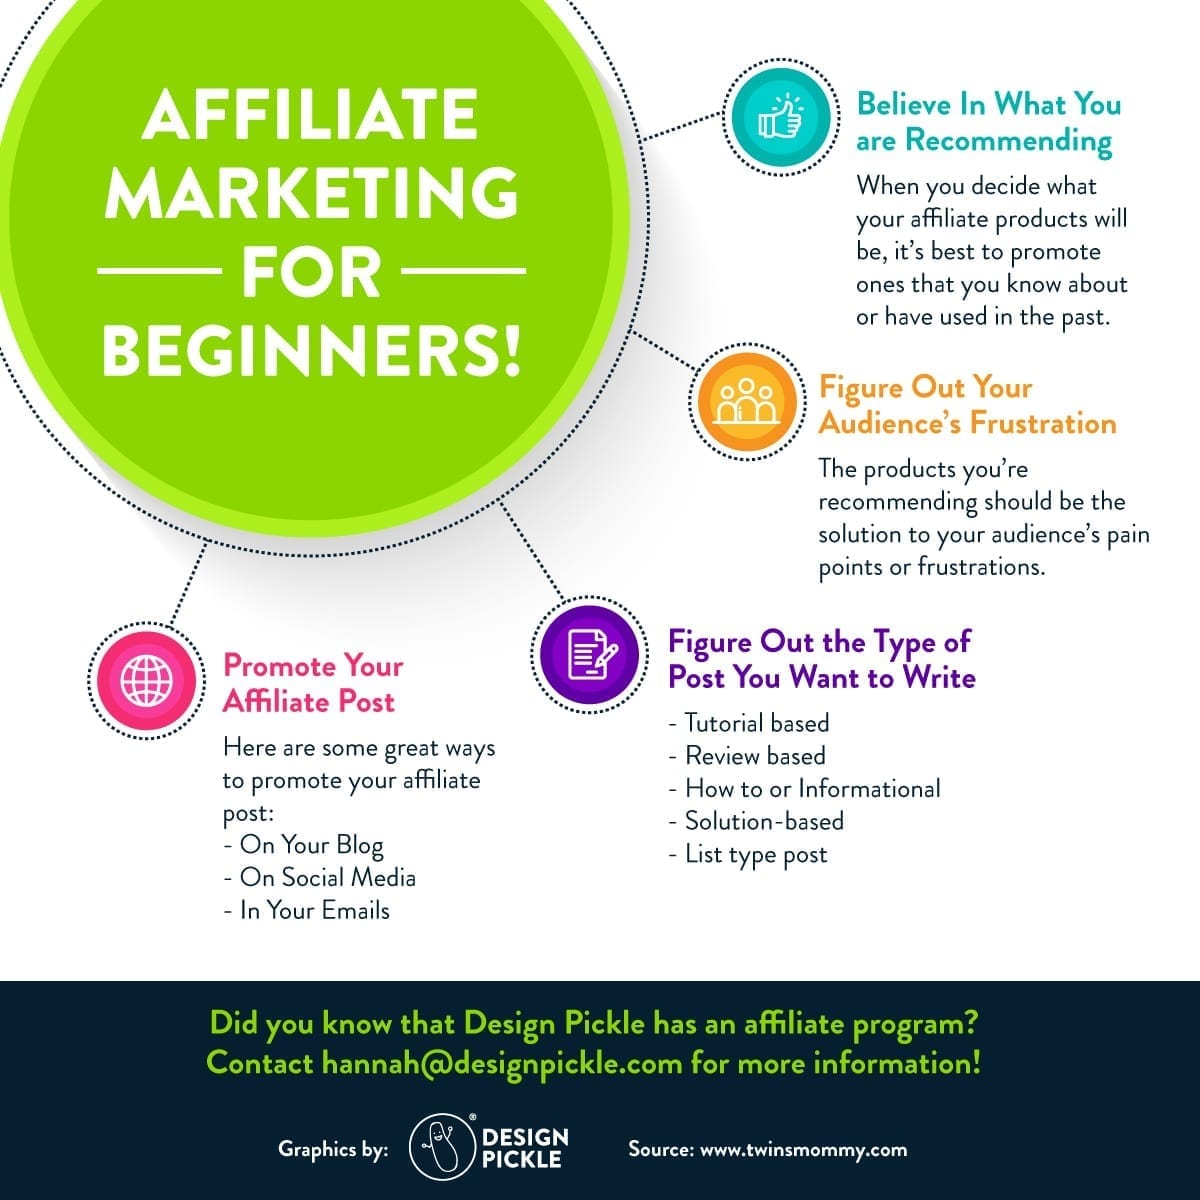 affiliate marketing infographic design to help with inspiration for your next infographic